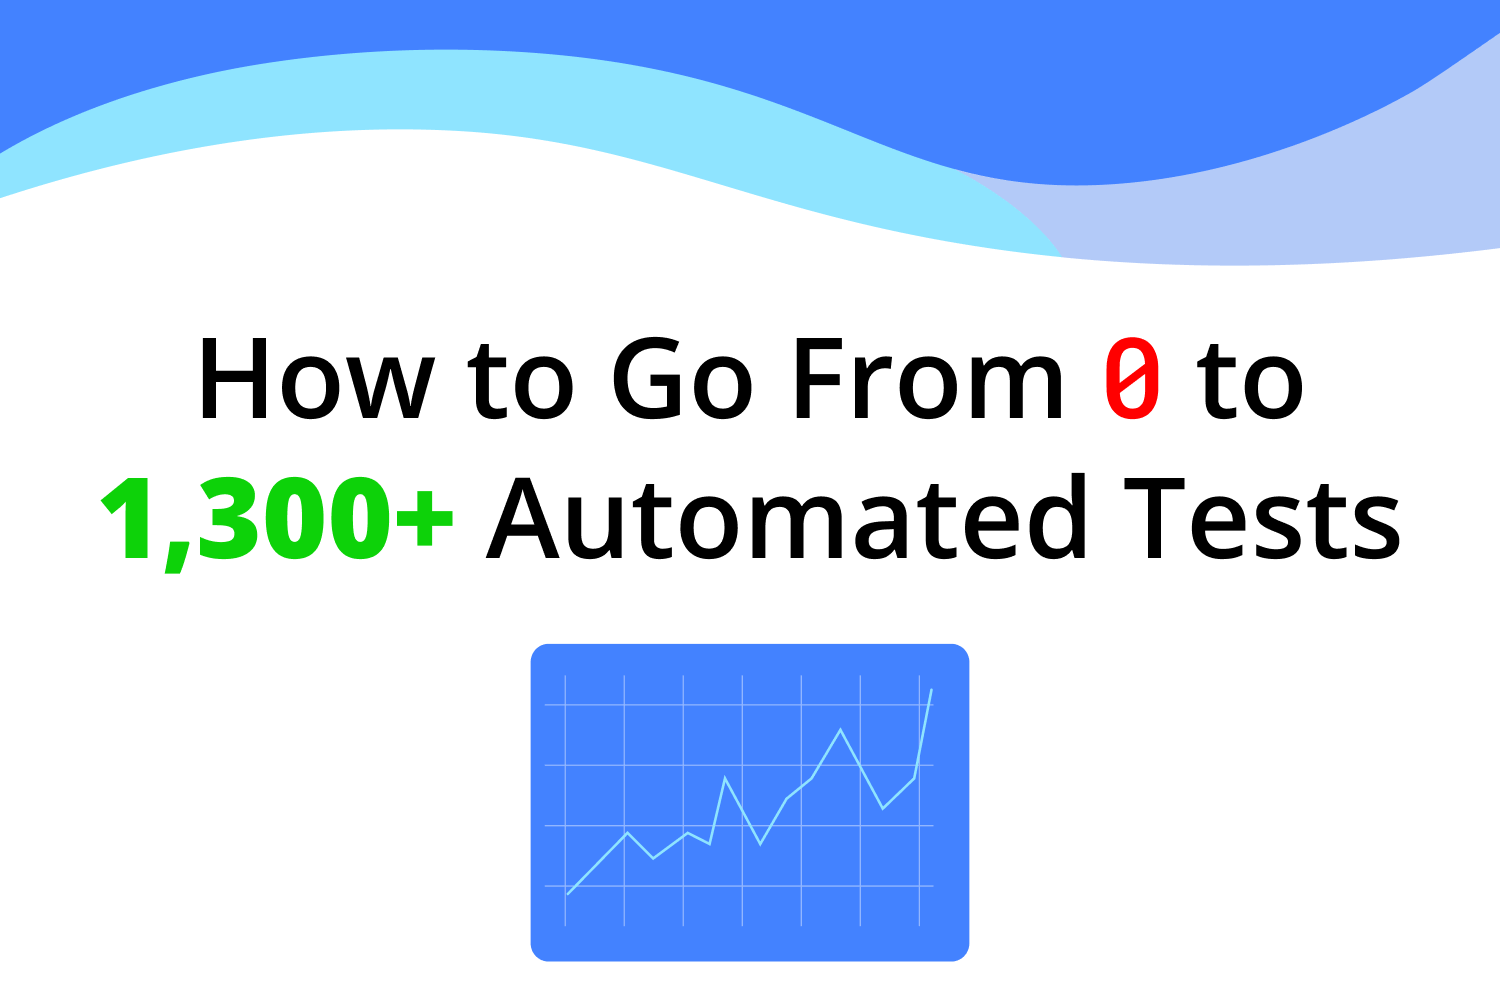 How to Go From 0 to 1,300+ Automated Tests